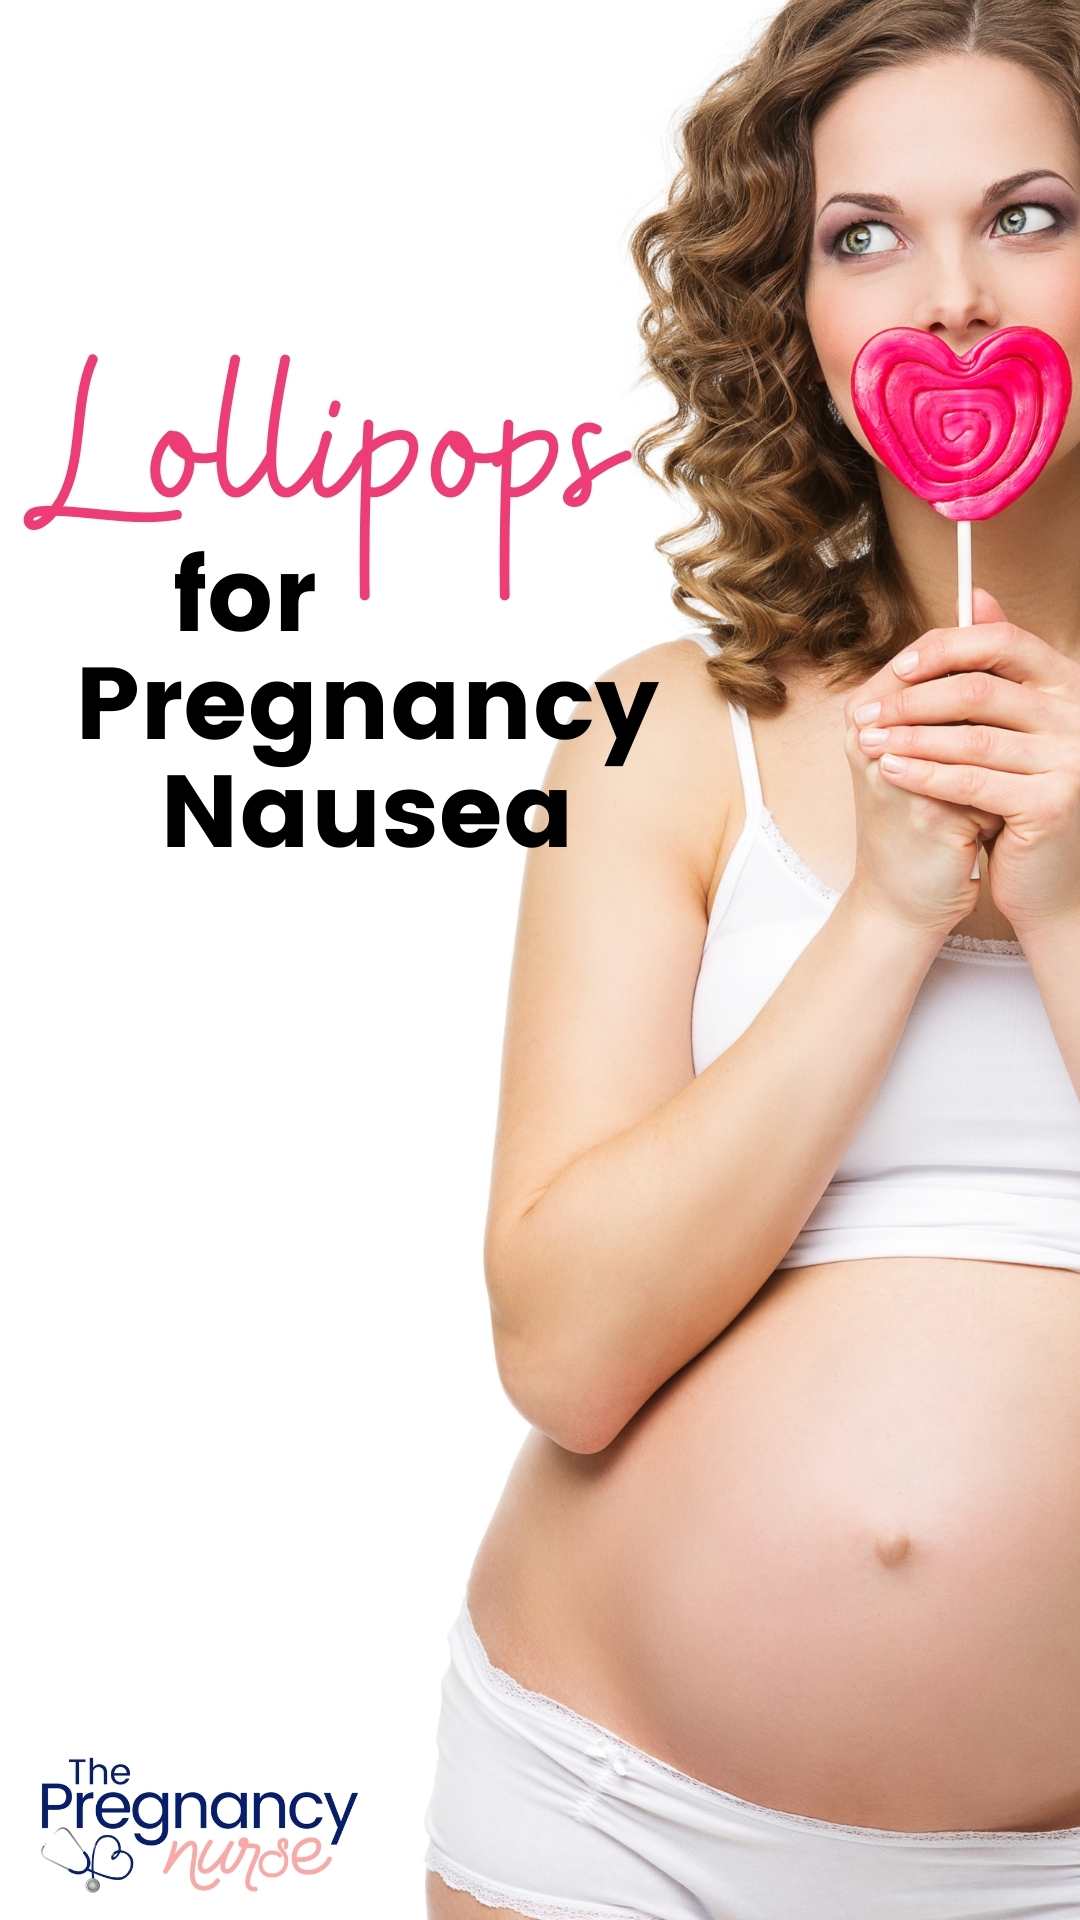 Are you struggling with nausea during your pregnancy? If so, you may be wondering if there is anything you can do to help ease the discomfort. One option that may be worth considering is using pregnancy lollipops to combat nausea. Read on to learn more about these lollipops and how they can help you feel better during your pregnancy.